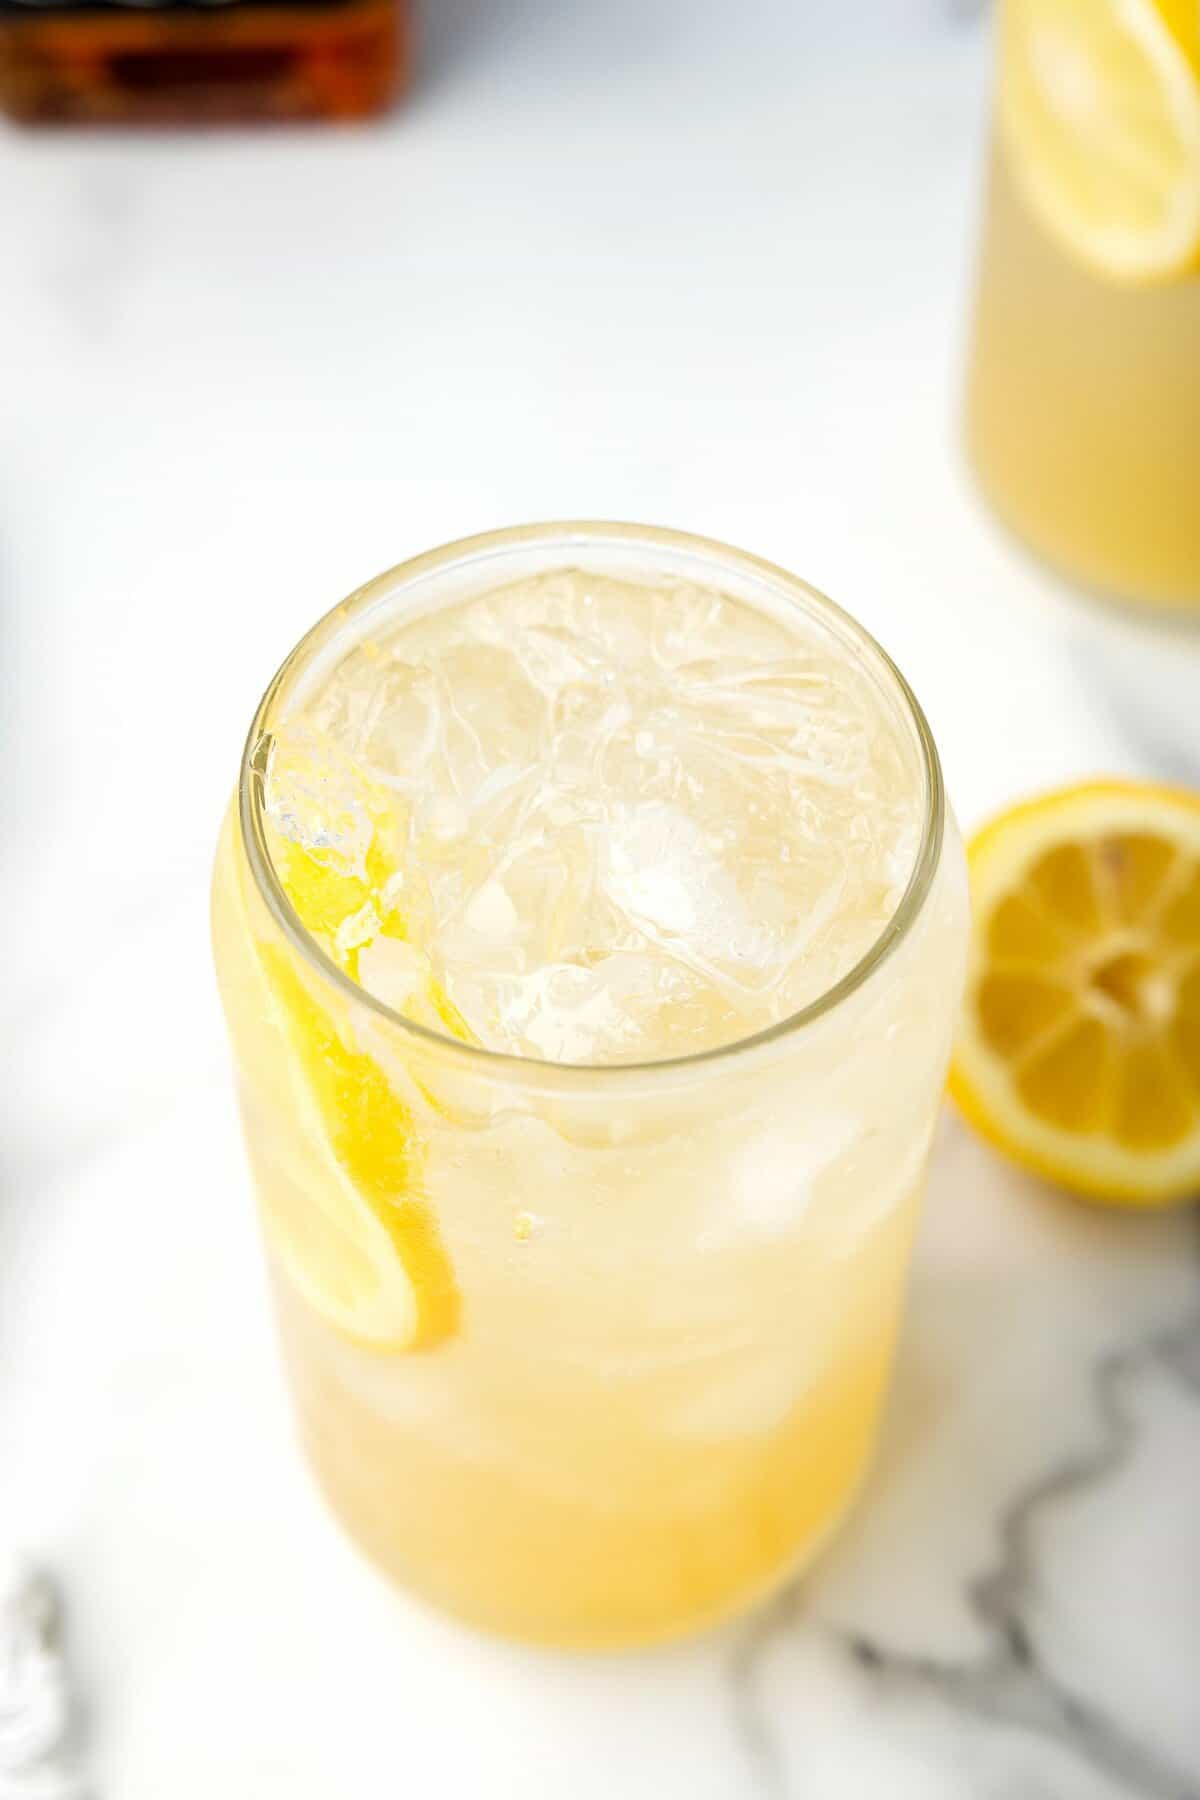 Glass with ice, lemon slices and whiskey lemonade